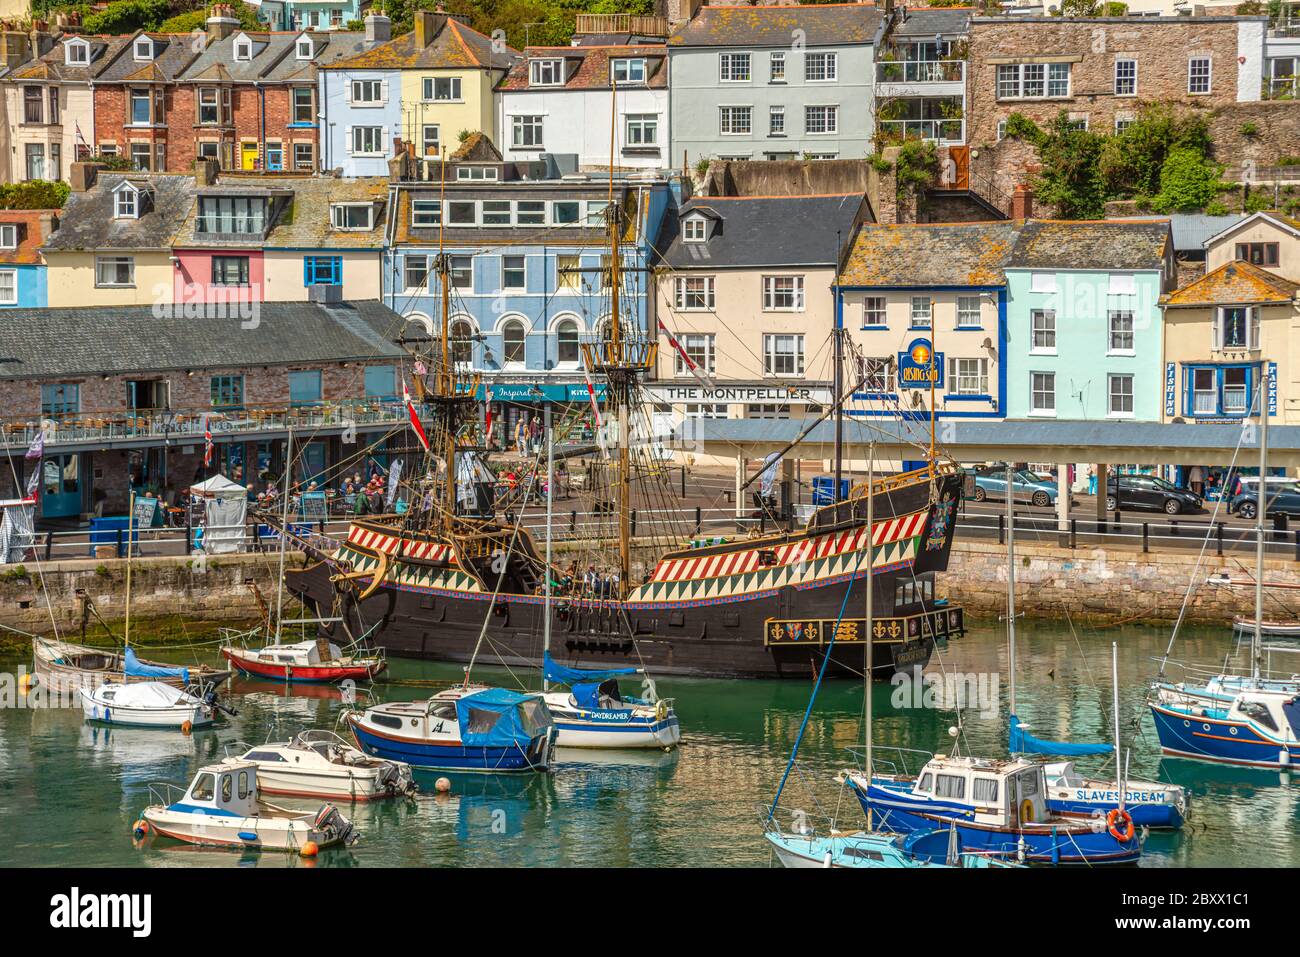 The replica of the Golden Hind Ship at Brixham harbour, Torbay, England, UK Stock Photo